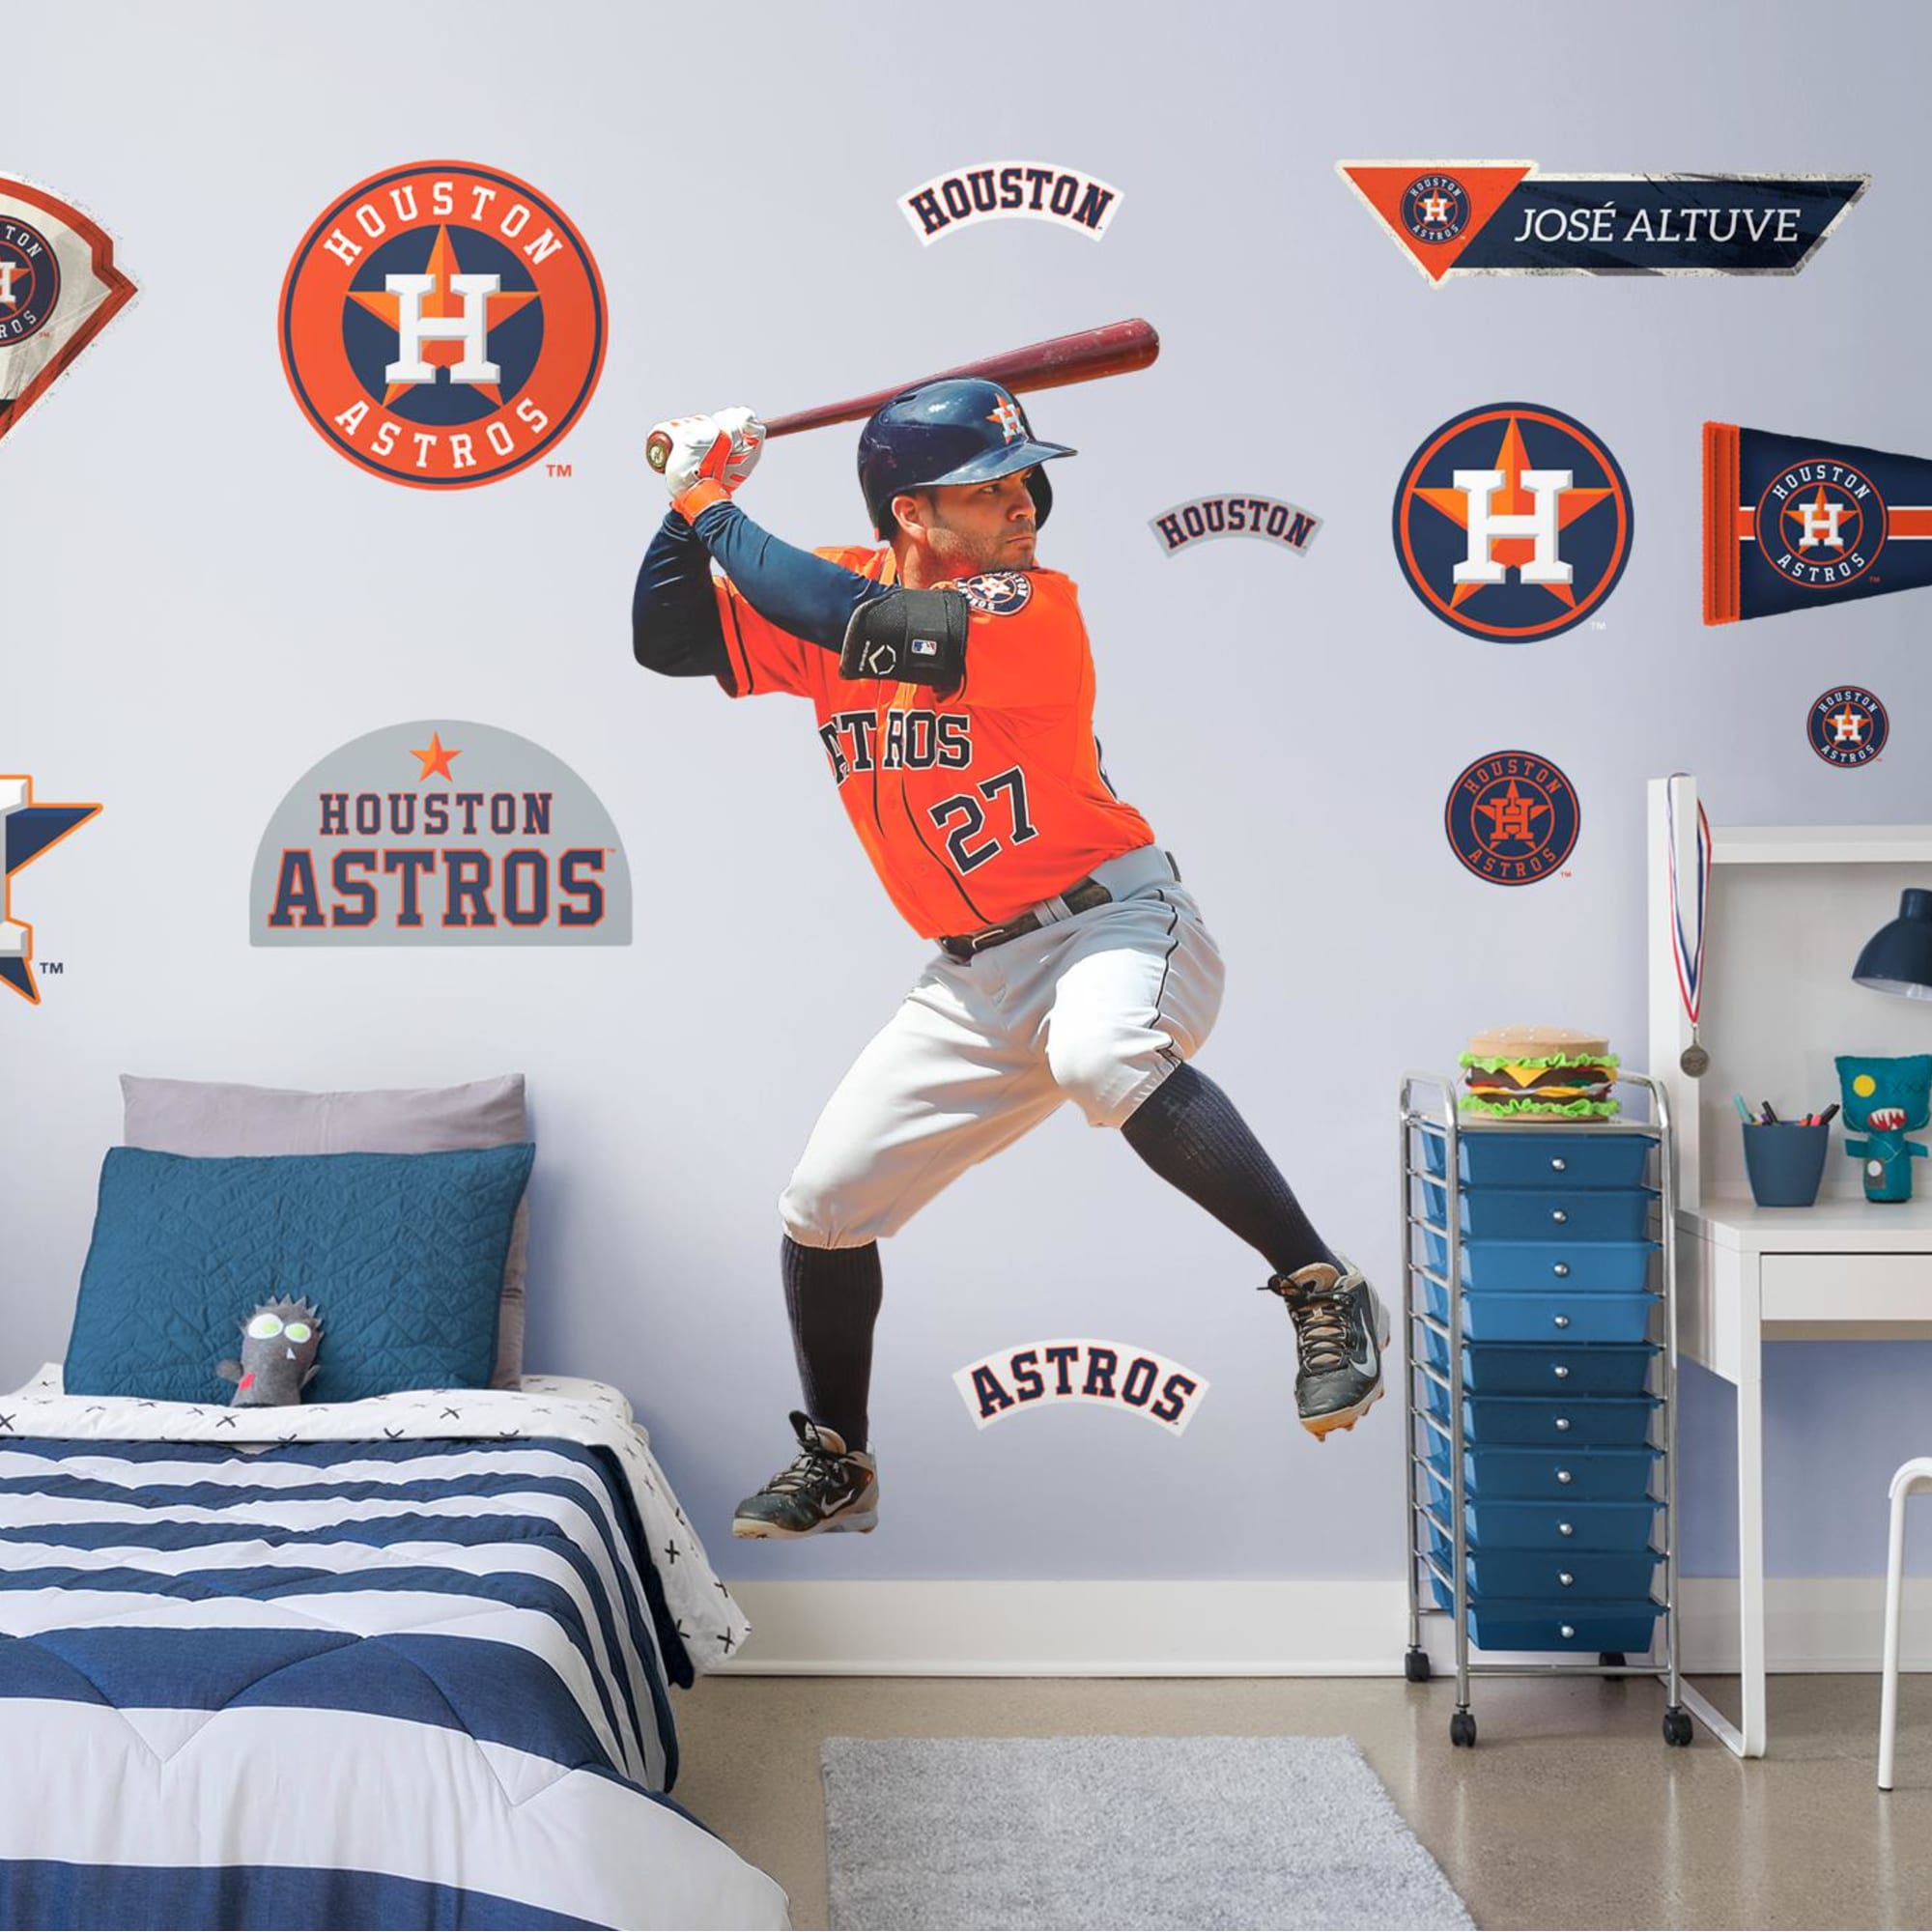 Jose Altuve for Houston Astros: Batting - Officially Licensed MLB Removable Wall Decal Life-Size Athlete + 15 Decals (40"W x 67"